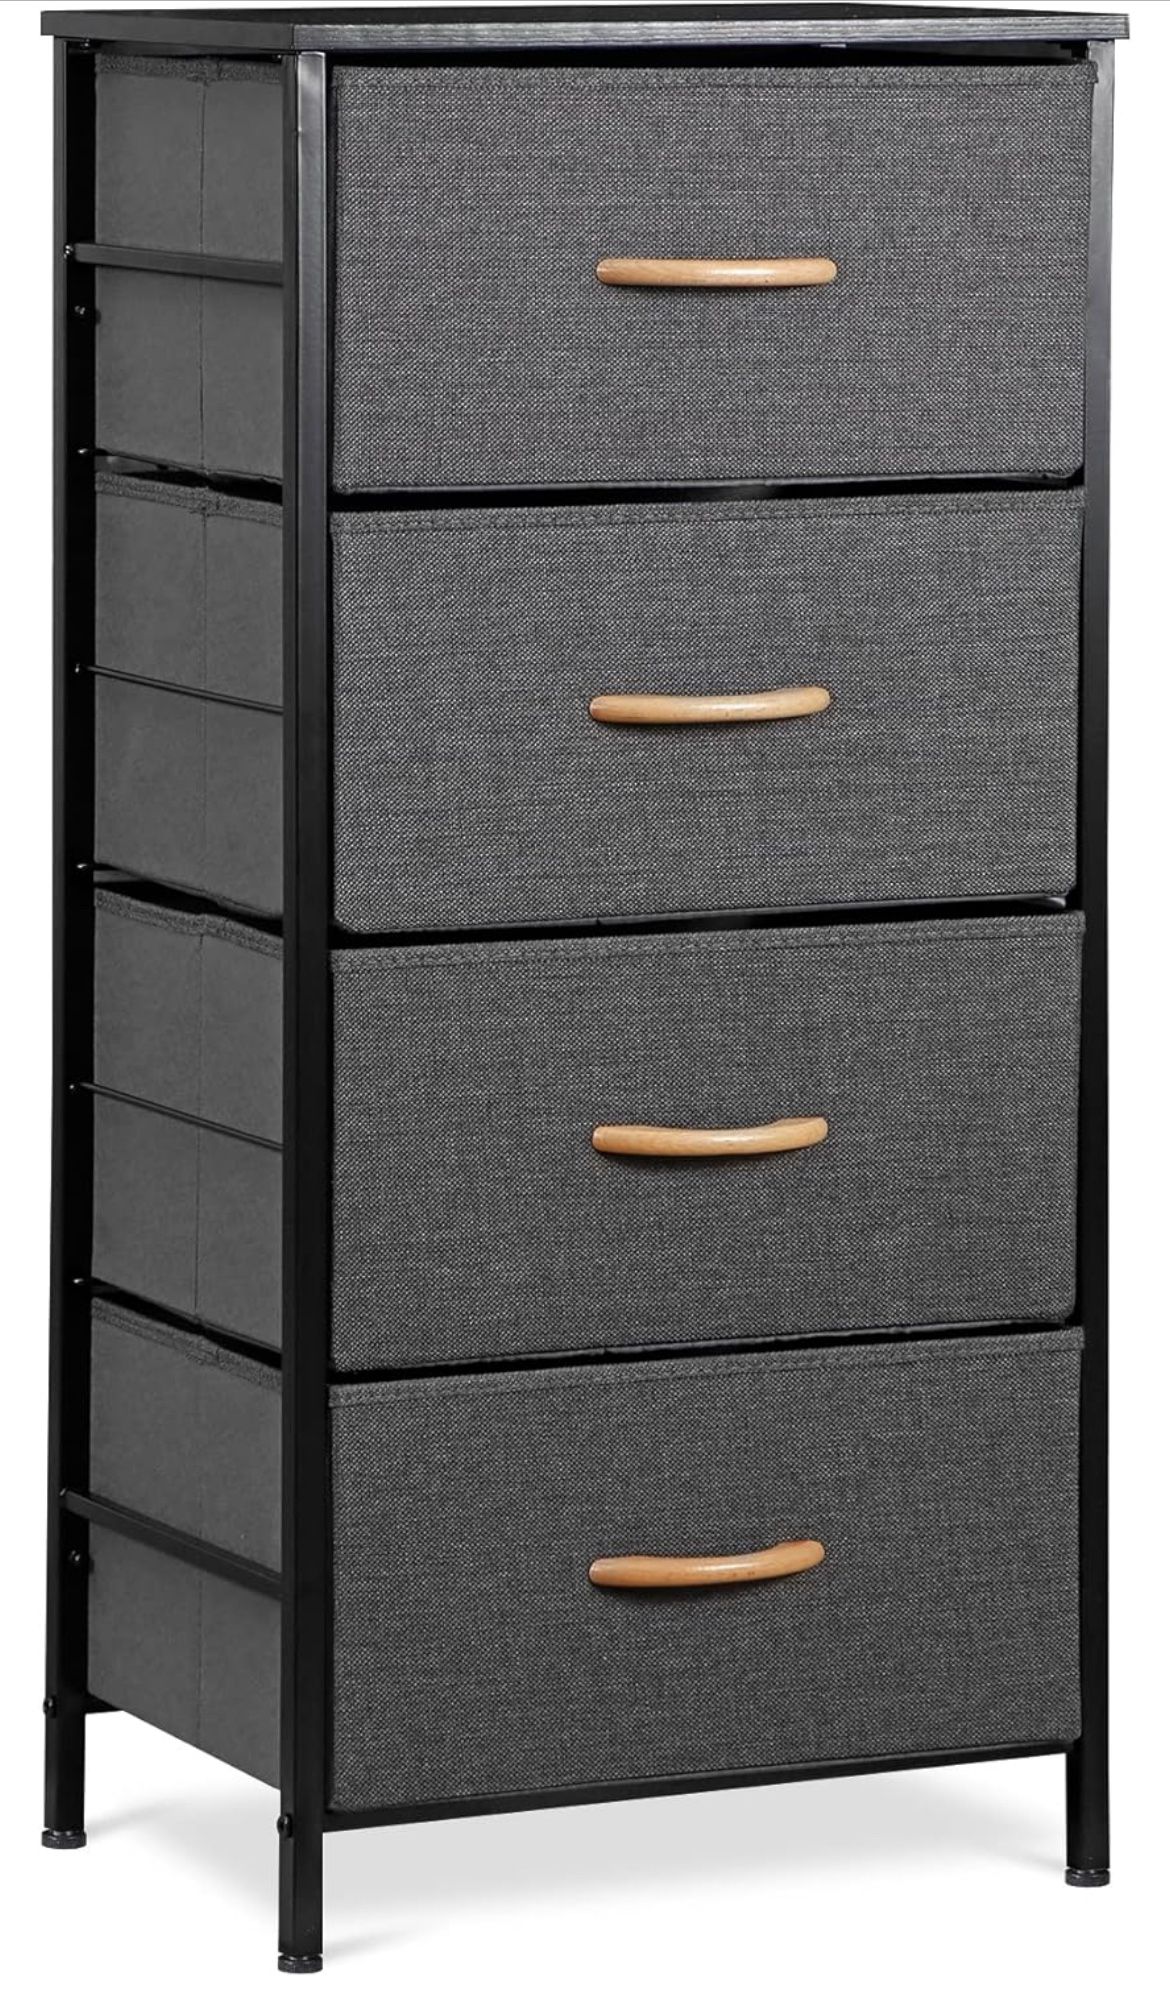 Dresser for Bedroom with 4 Storage Drawers, Fabric Chest of Drawers Storage Organizer with Wood Top and Metal Frame for Closet Living Room Hallway Ent